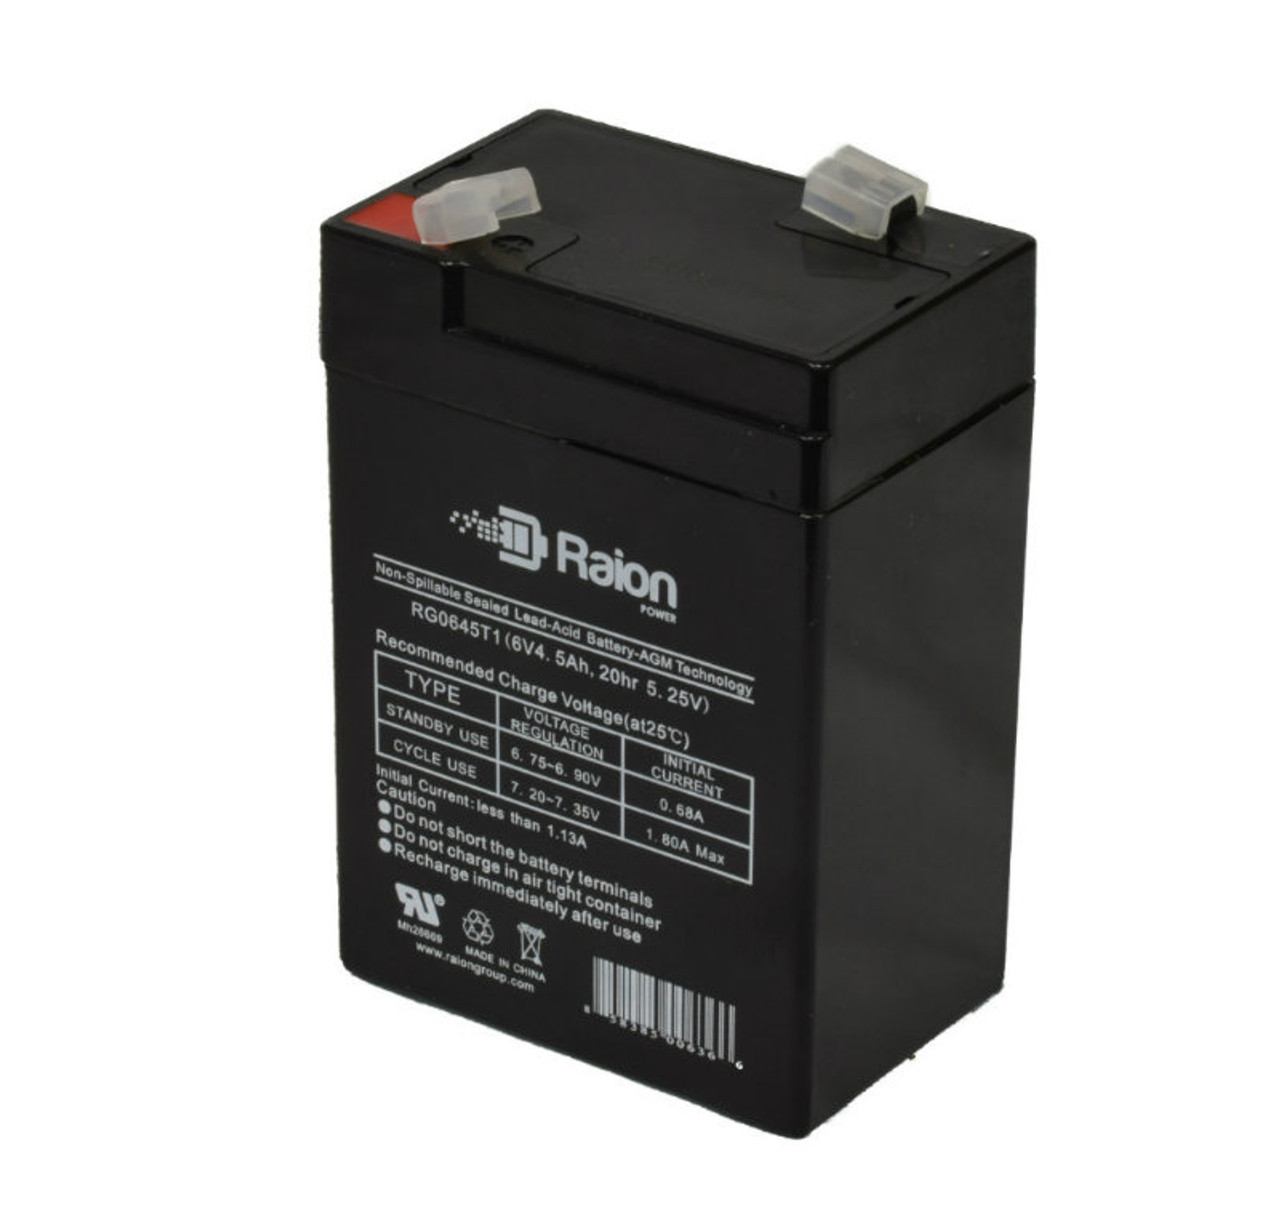 Raion Power RG0645T1 6V 4.5Ah Replacement Battery Cartridge for LongWay 3FM4